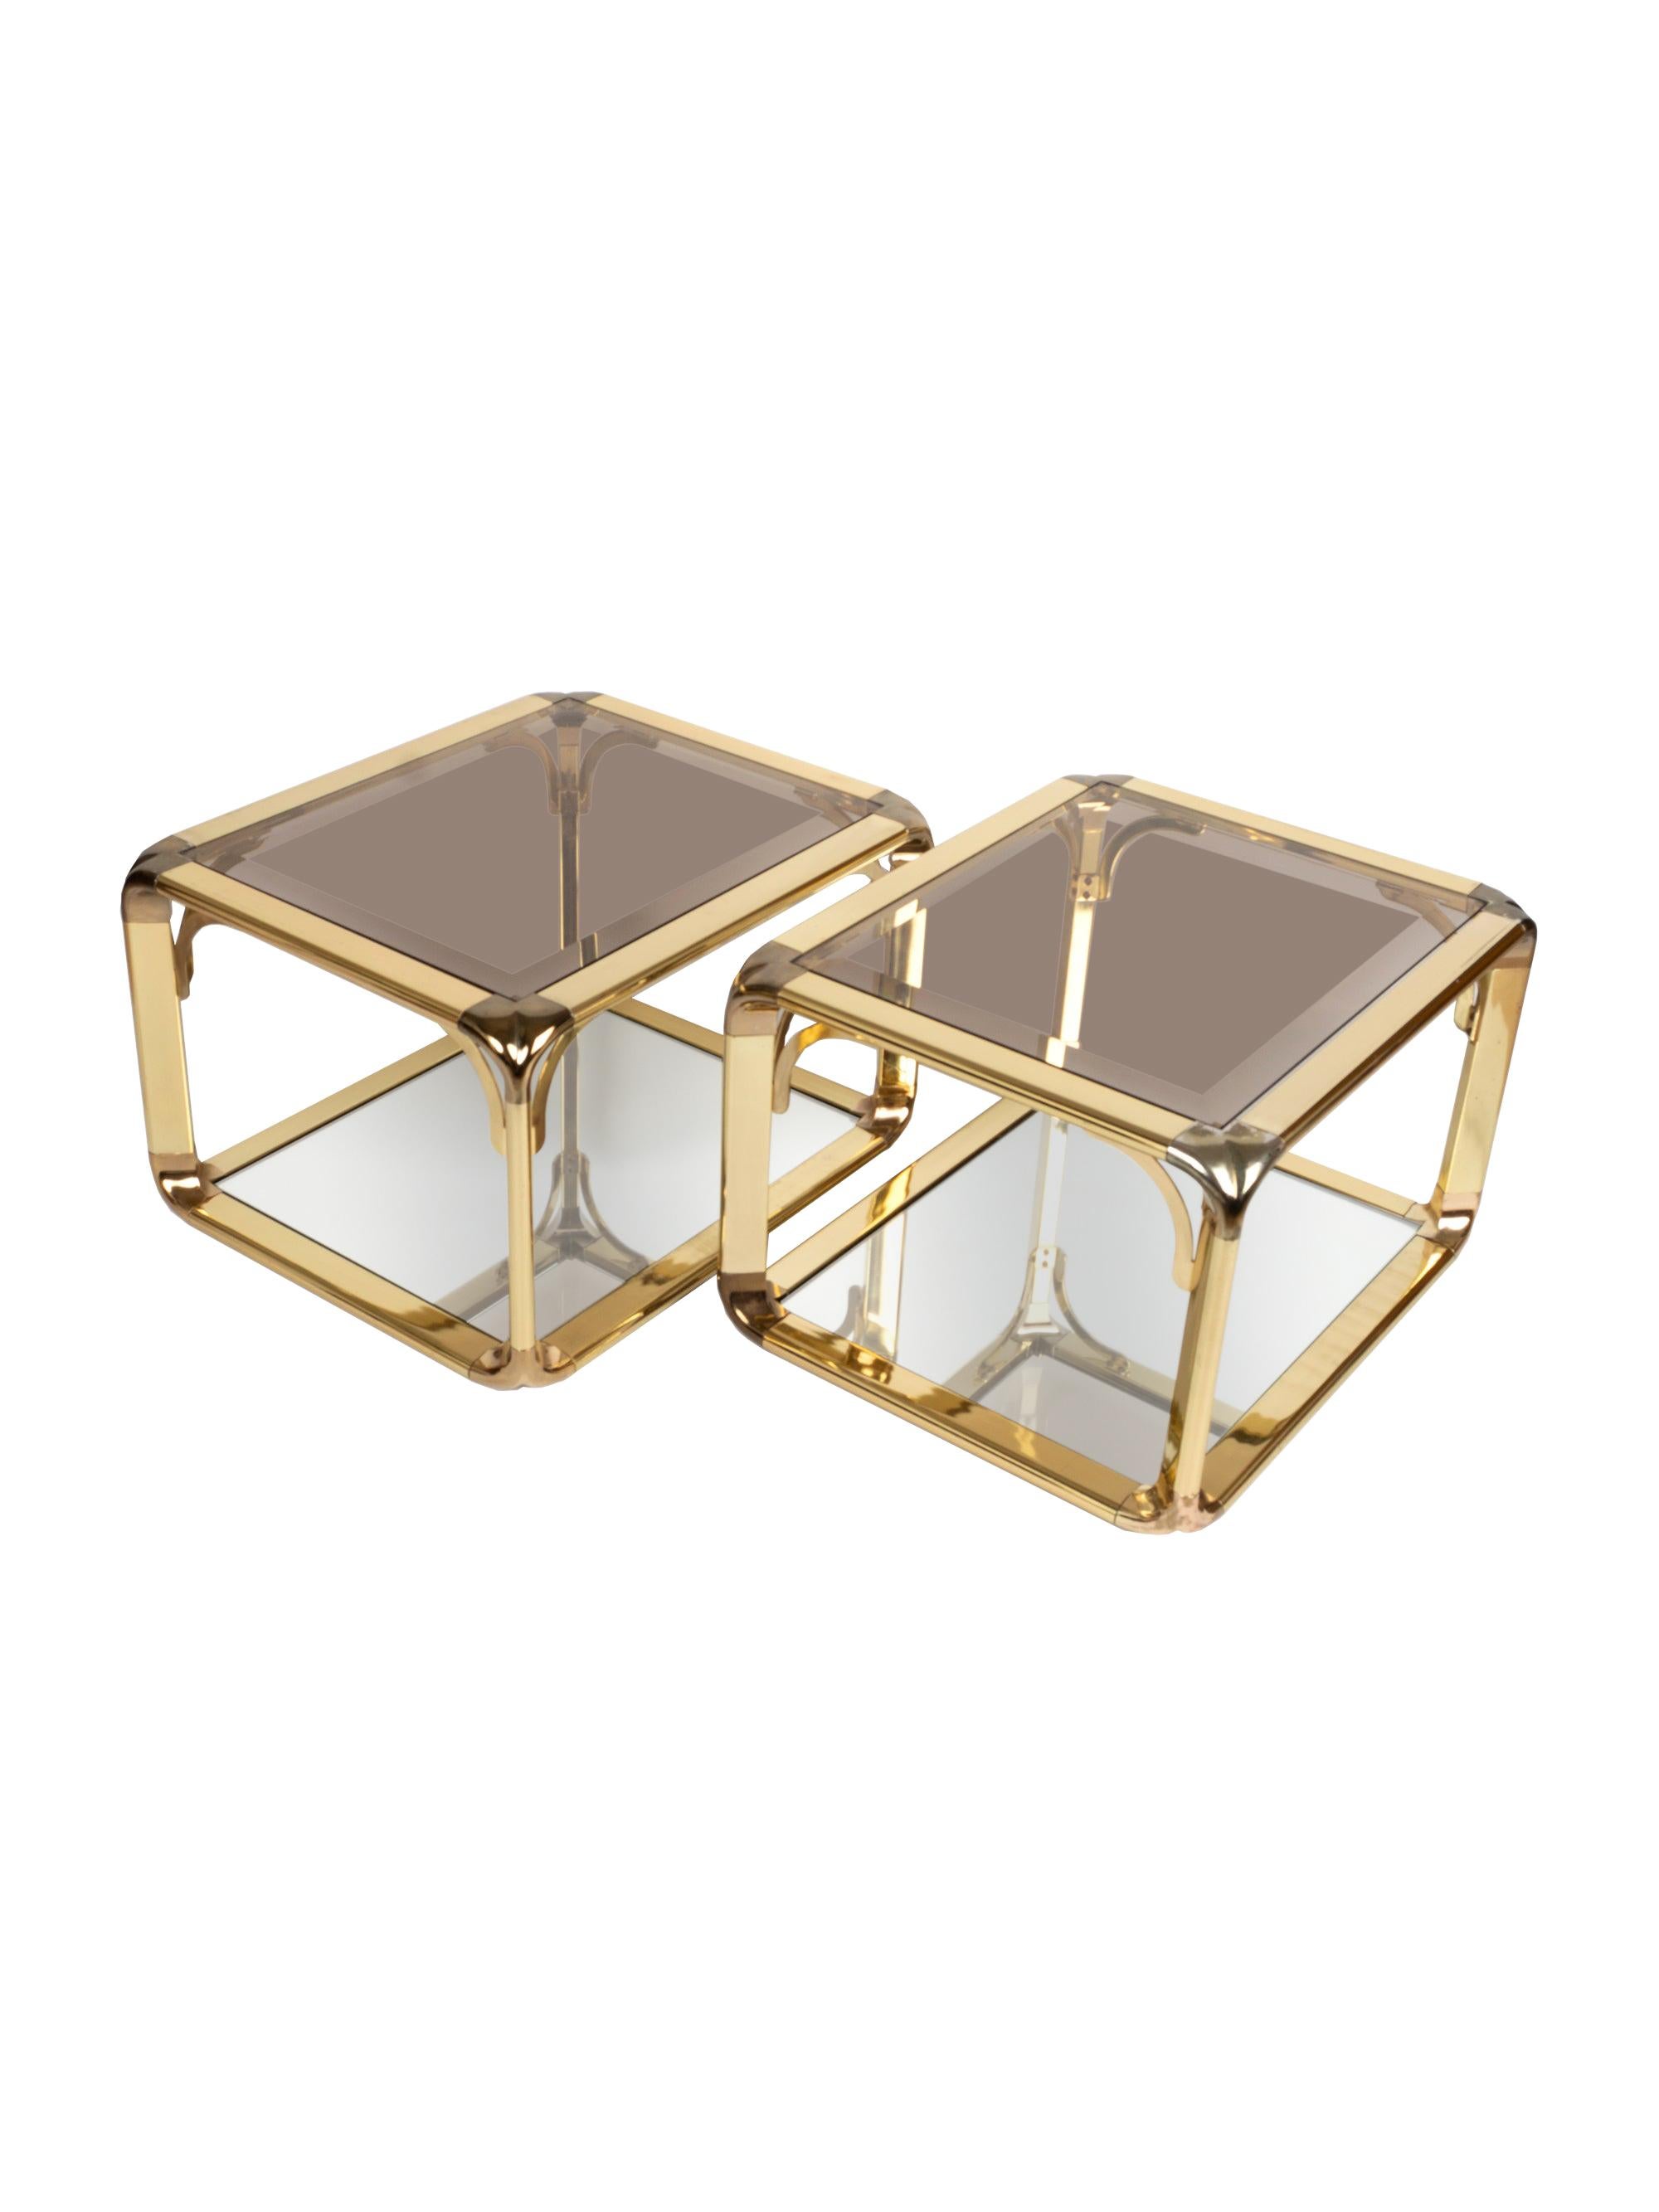 Pair of Mirrored Gold Chrome End Tables / Side Tables, Belgium, circa 1970